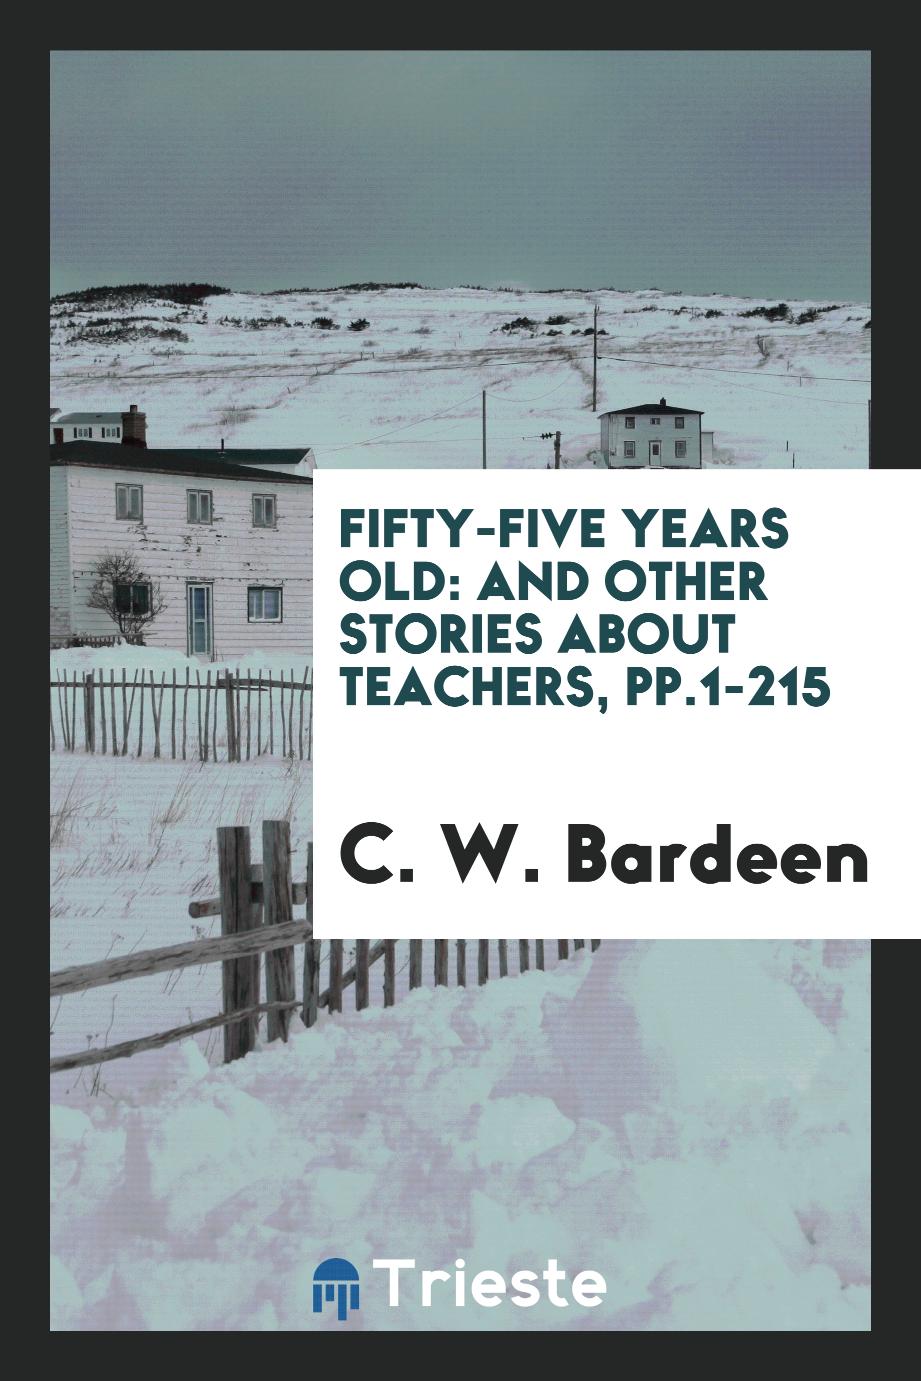 Fifty-Five Years Old: And Other Stories about Teachers, pp.1-215